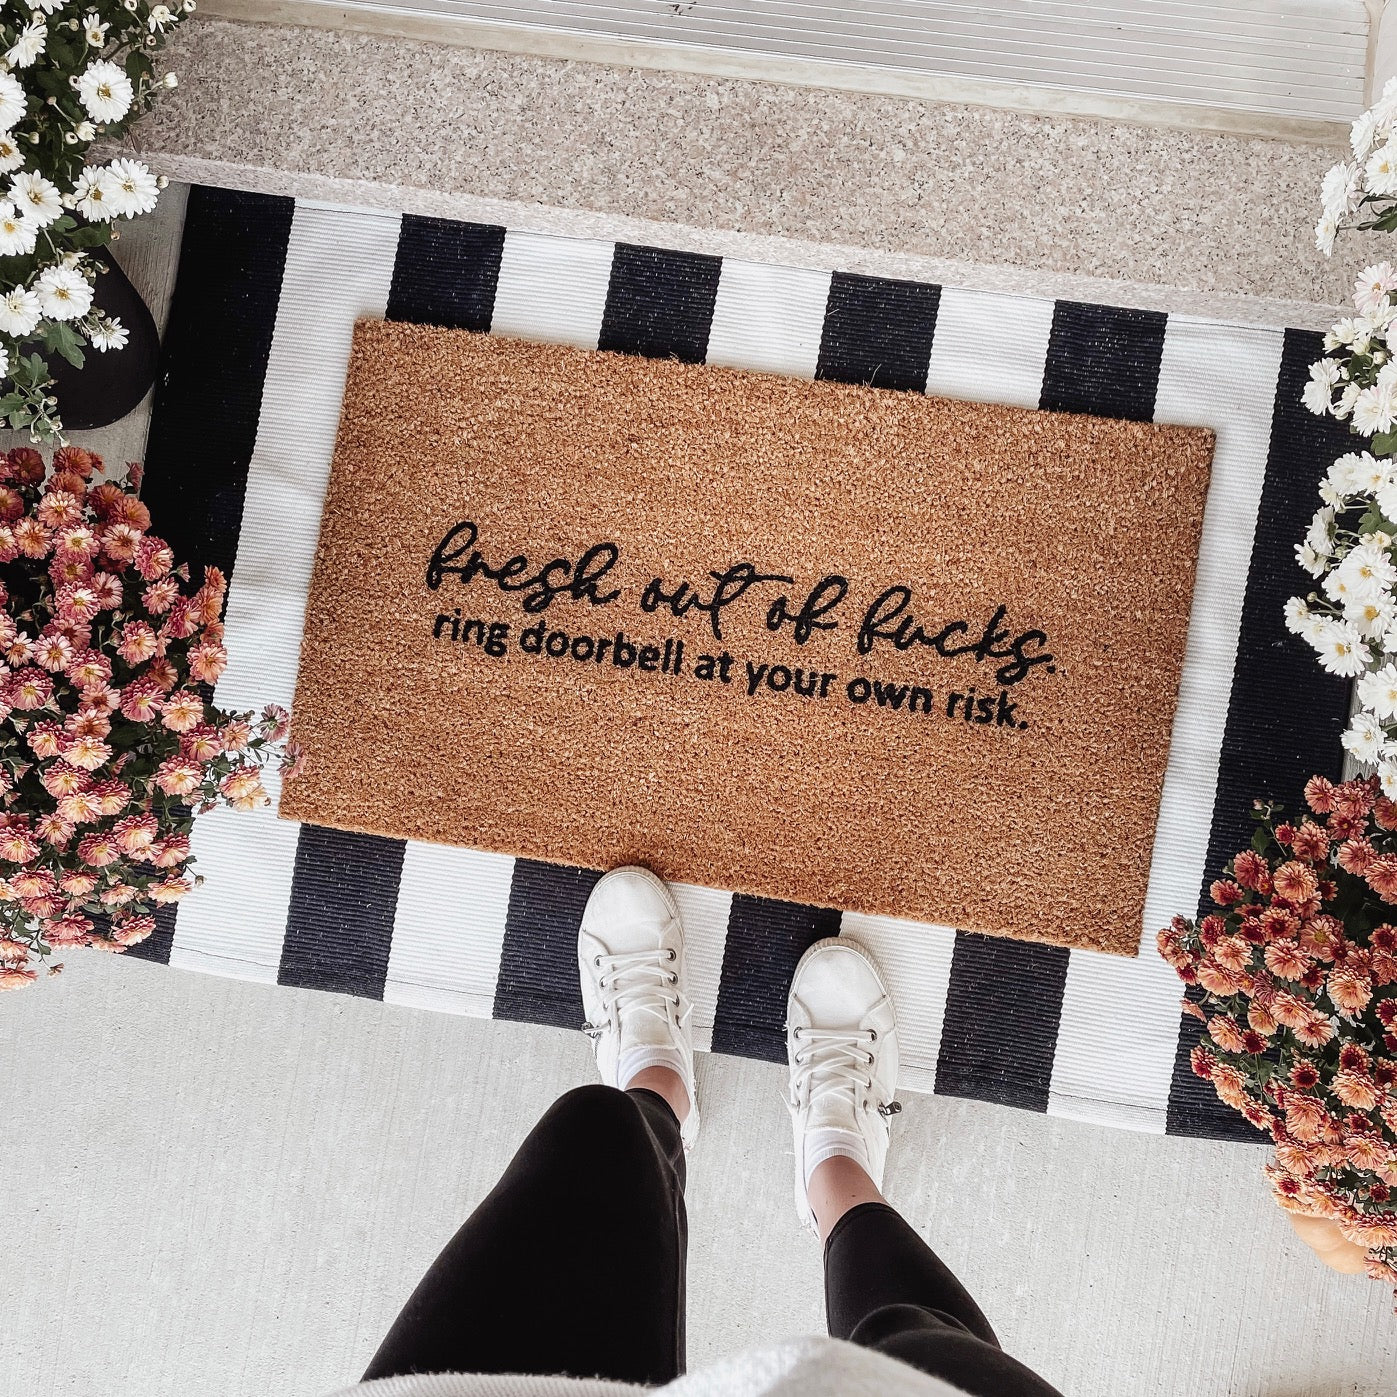 Fresh Out ... Ring doorbell at your own risk Doormat